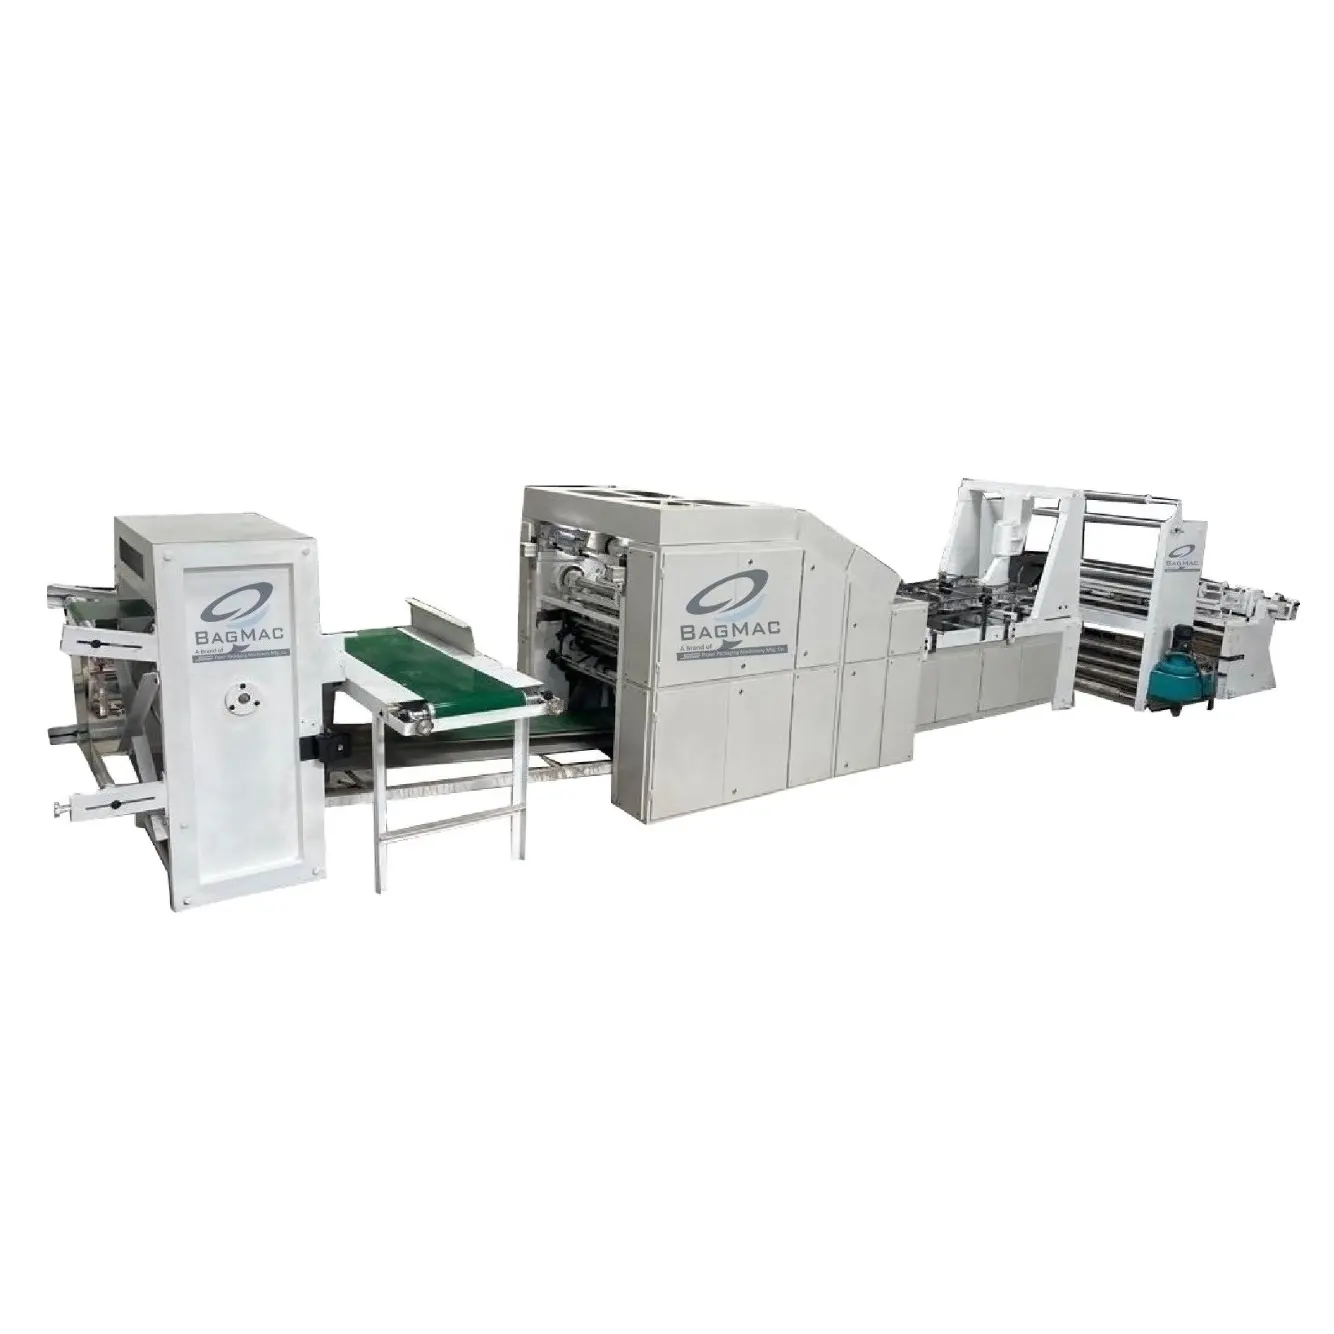 Factory Price Square Bottom automatic paper bag making machine paper bag production machine at Affordable Price